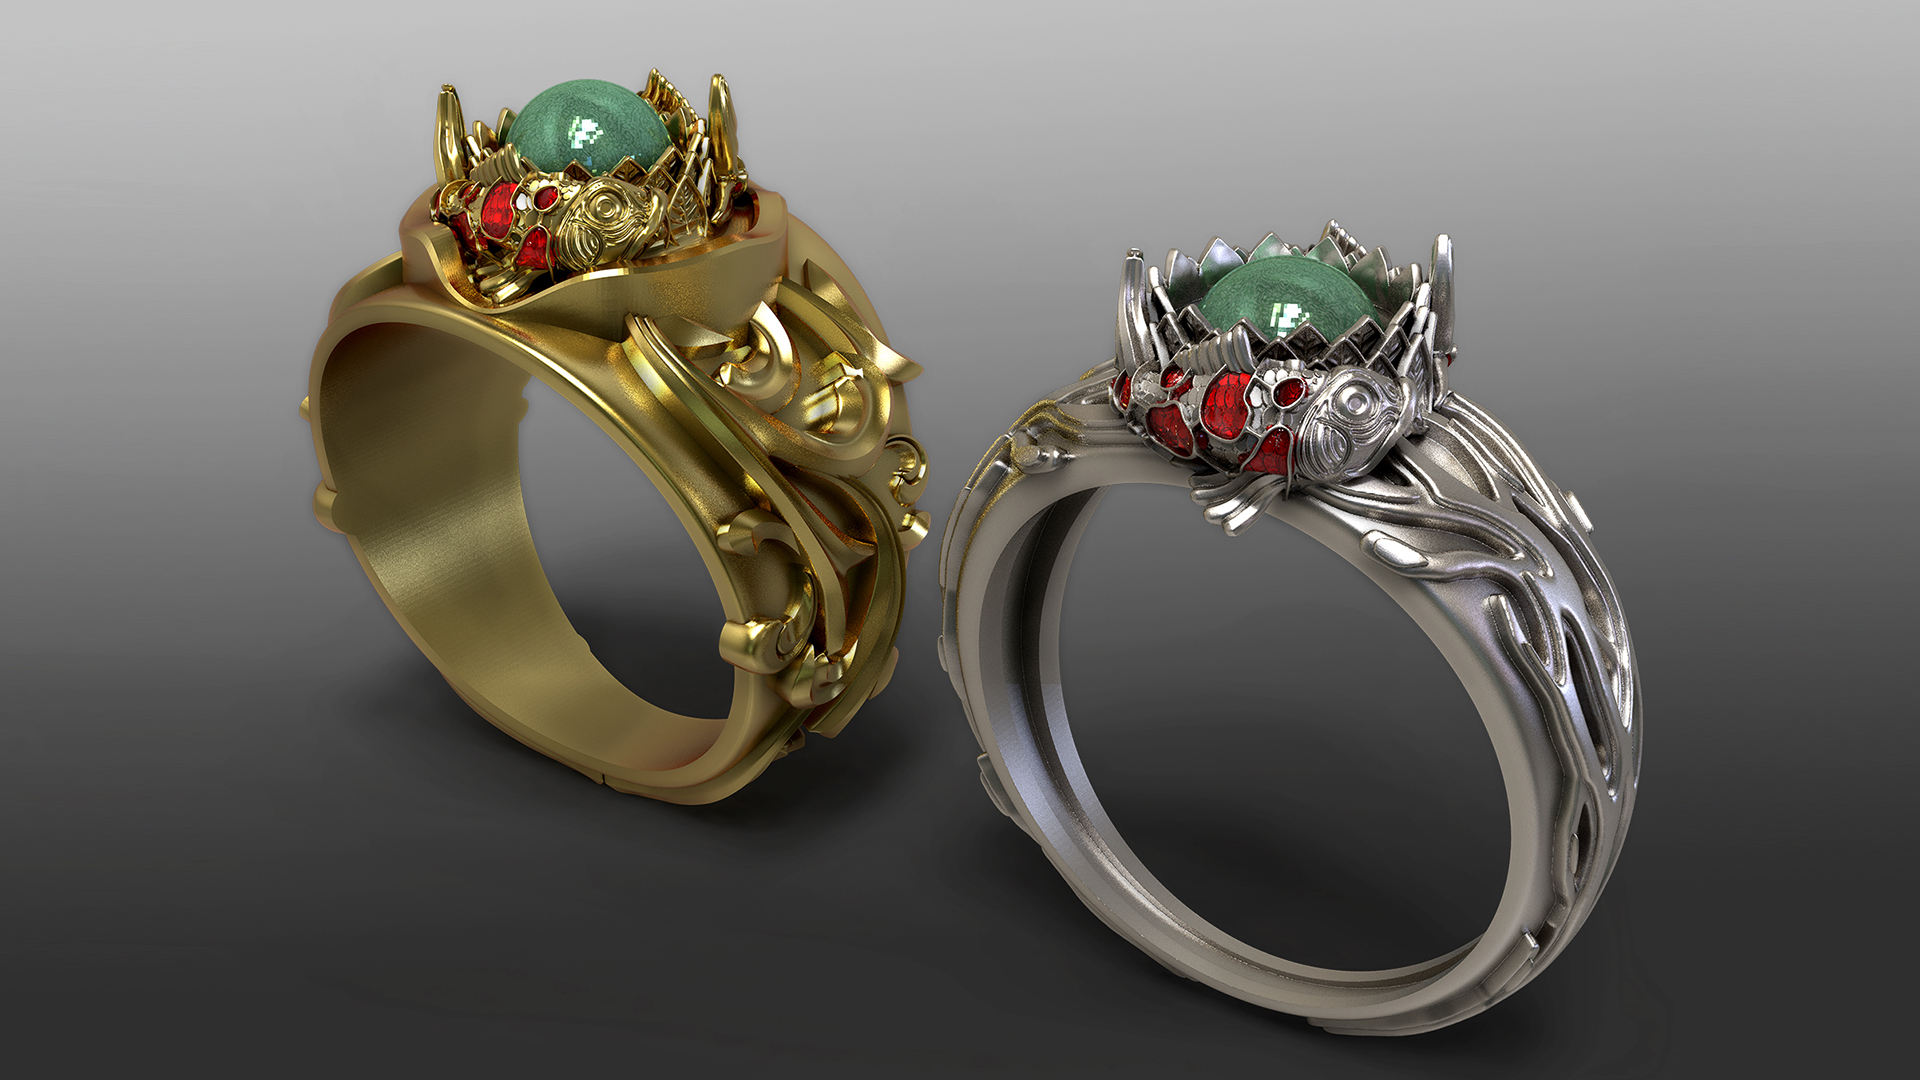 jewelry design by zbrush